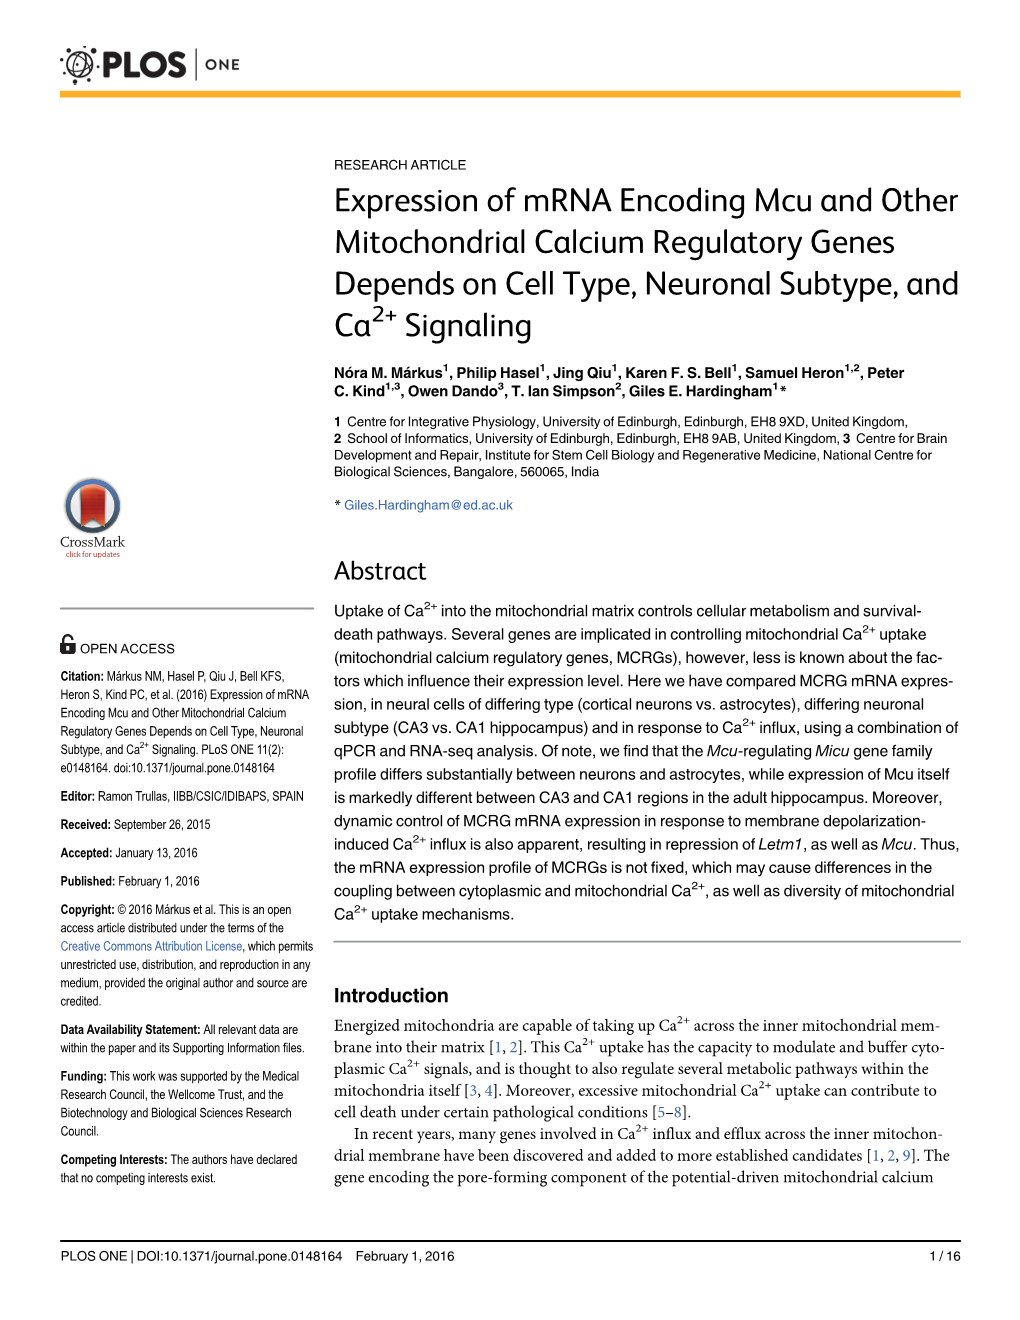 Expression of Mrna Encoding Mcu and Other Mitochondrial Calcium Regulatory Genes Depends on Cell Type, Neuronal Subtype, and Ca2+ Signaling